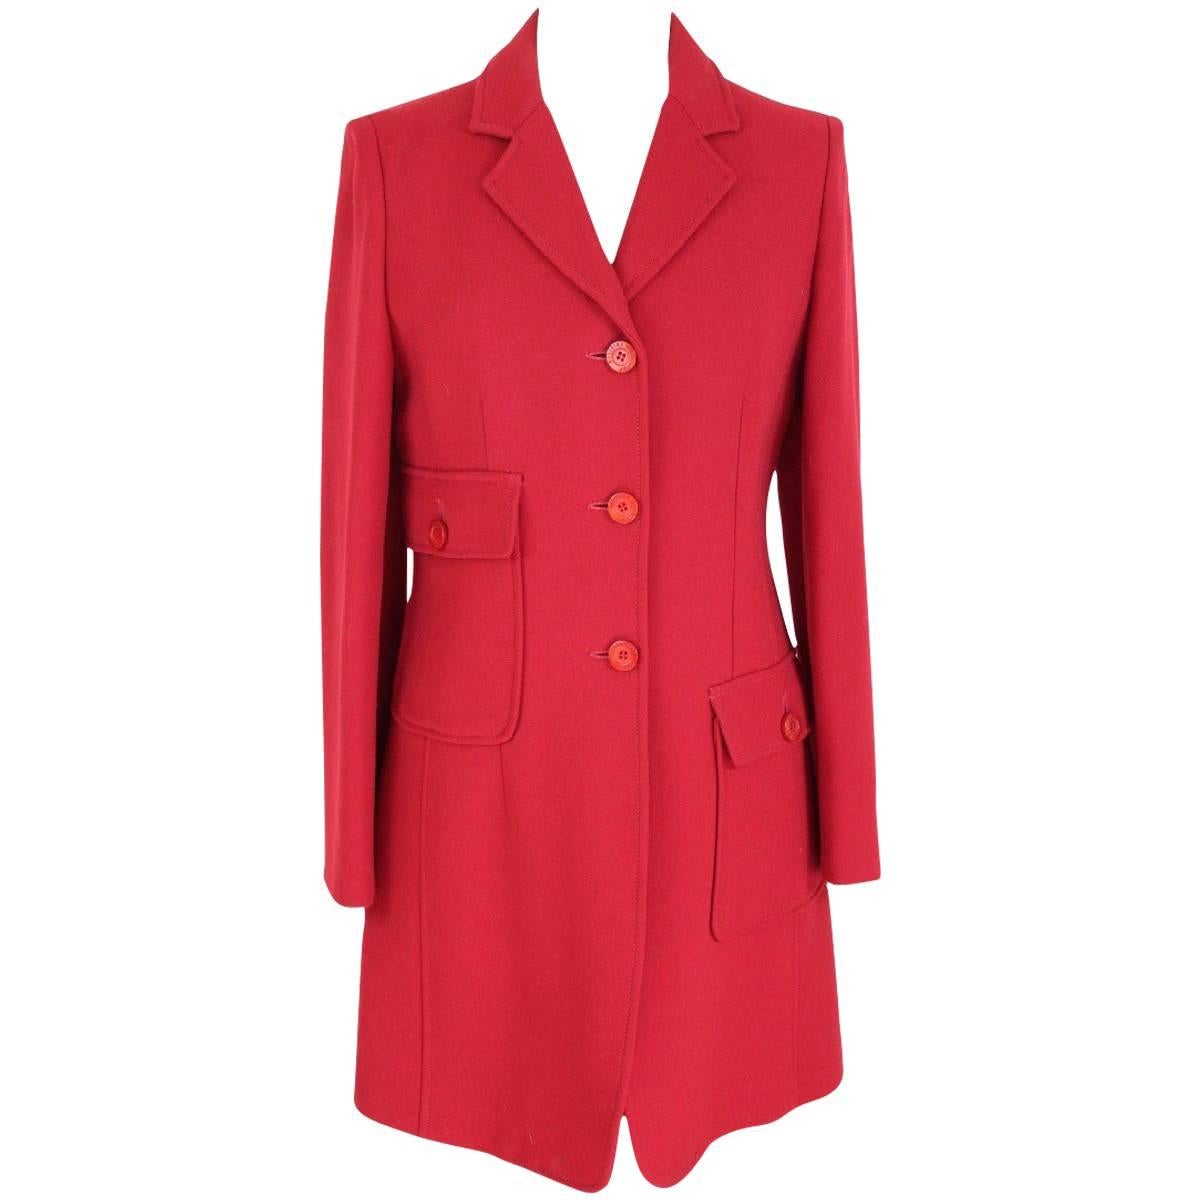 Moschino 1990s vintage red wool blend long coat slim fit 